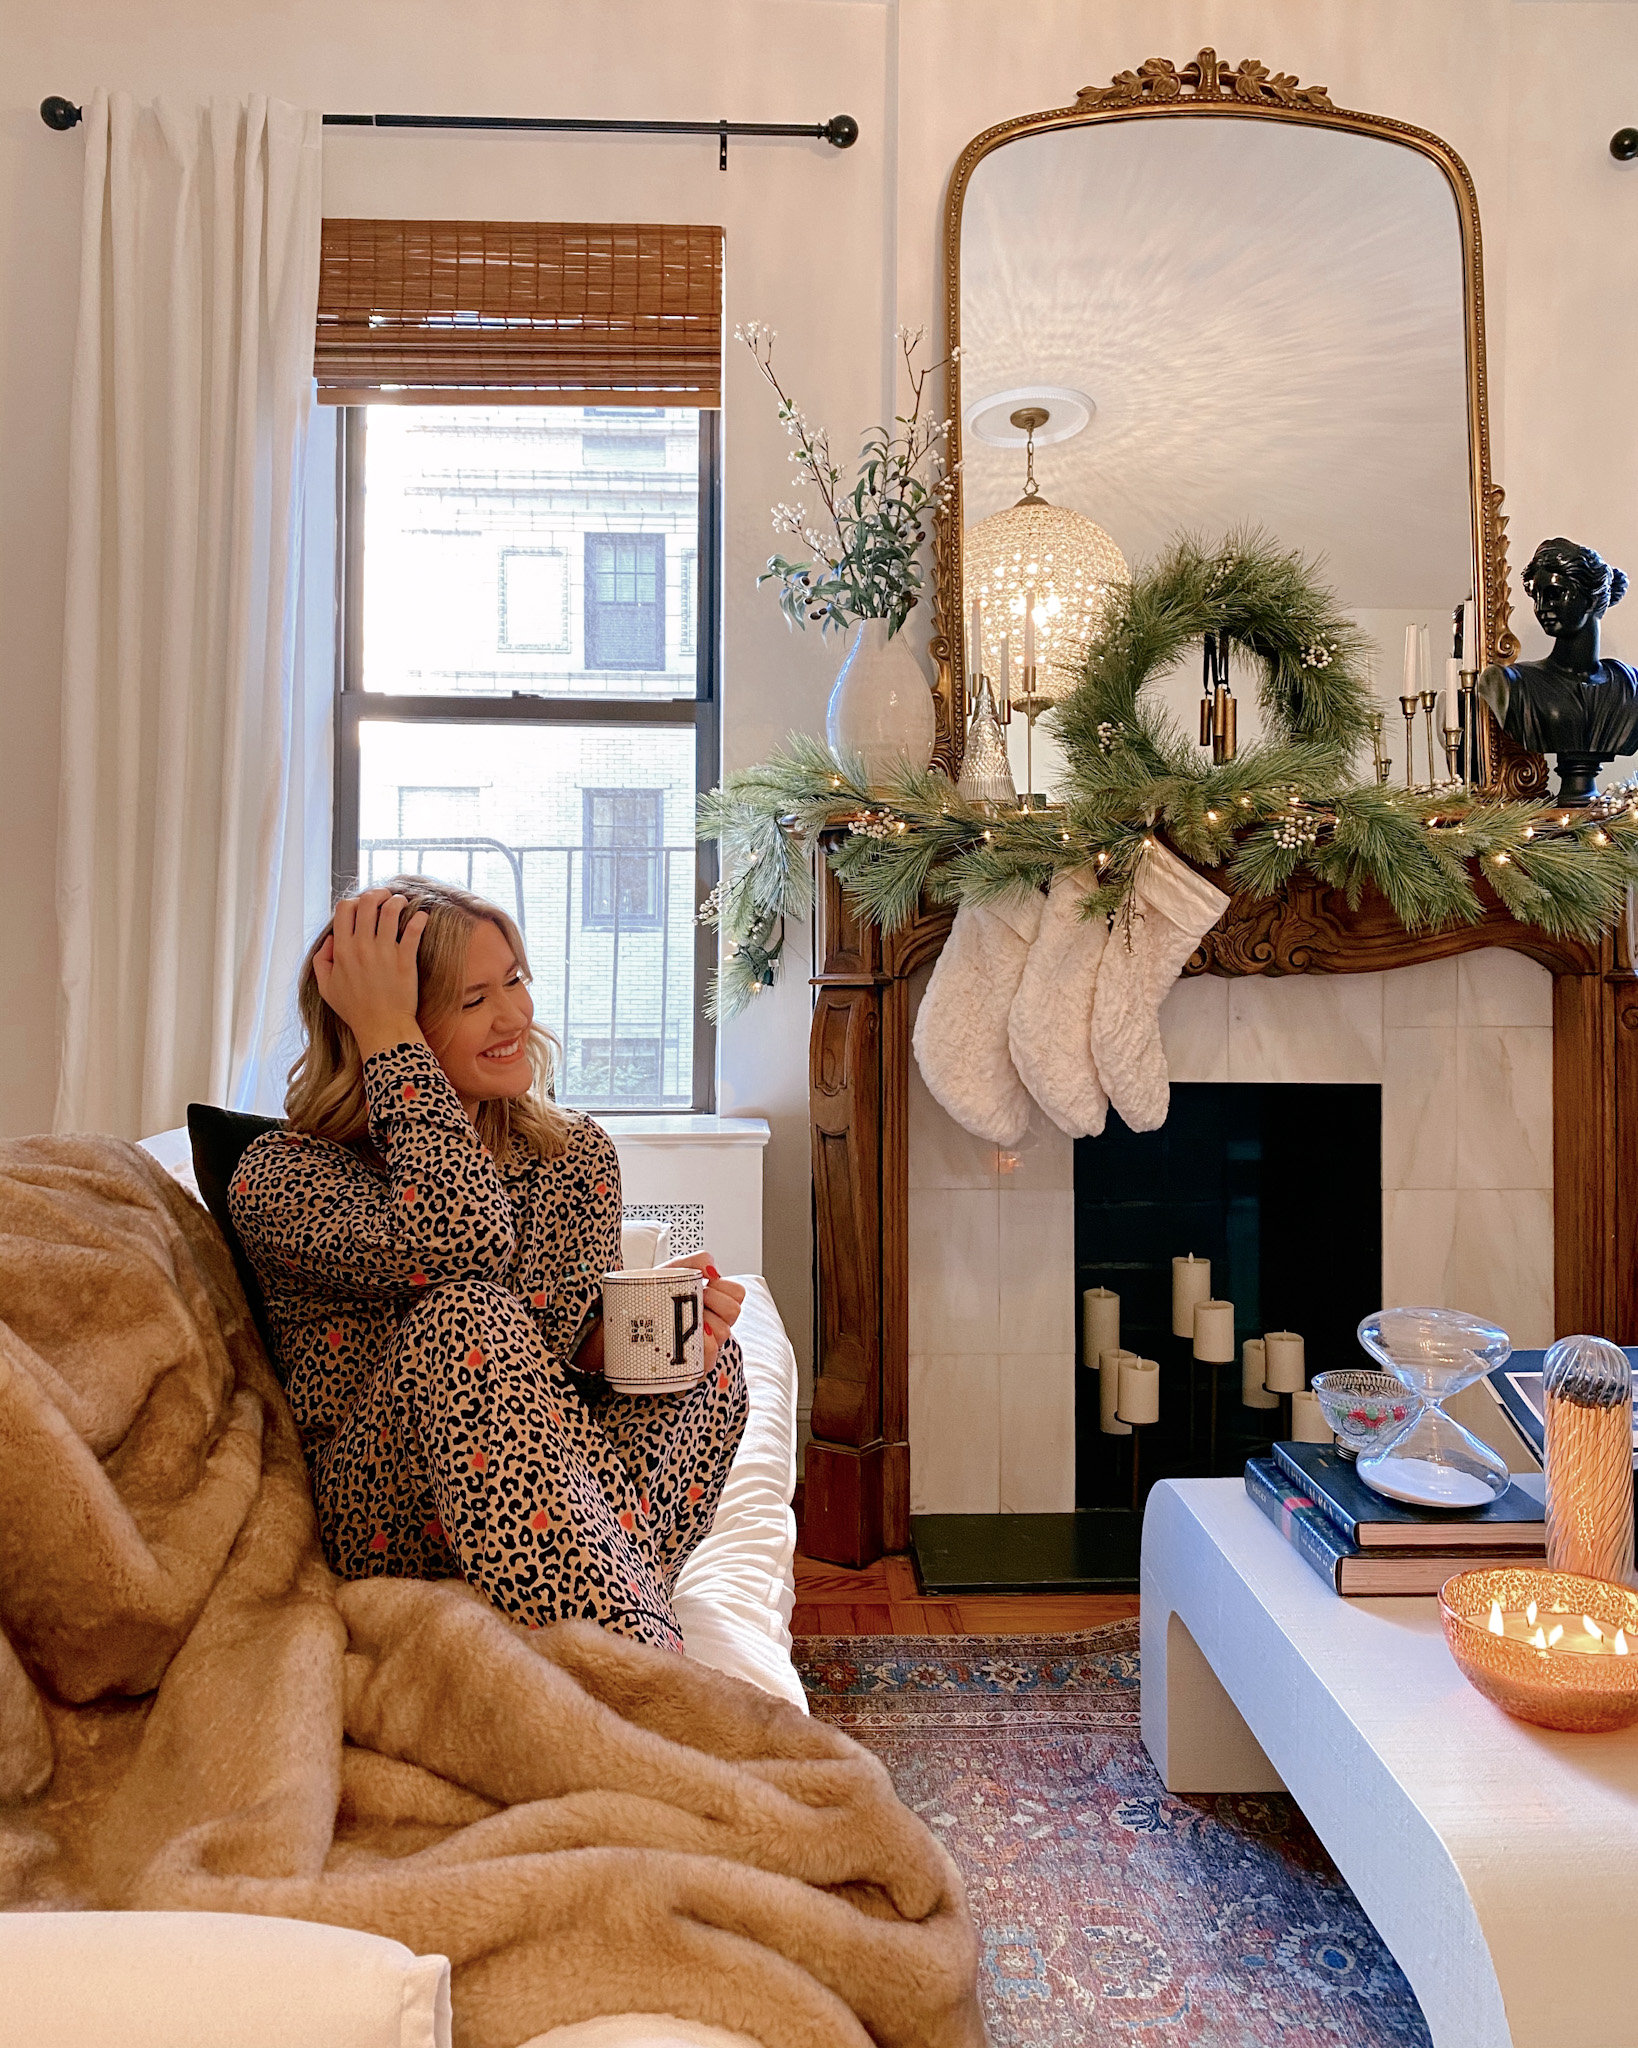 Anna sitting on her couch in her Upper East Side apartment.